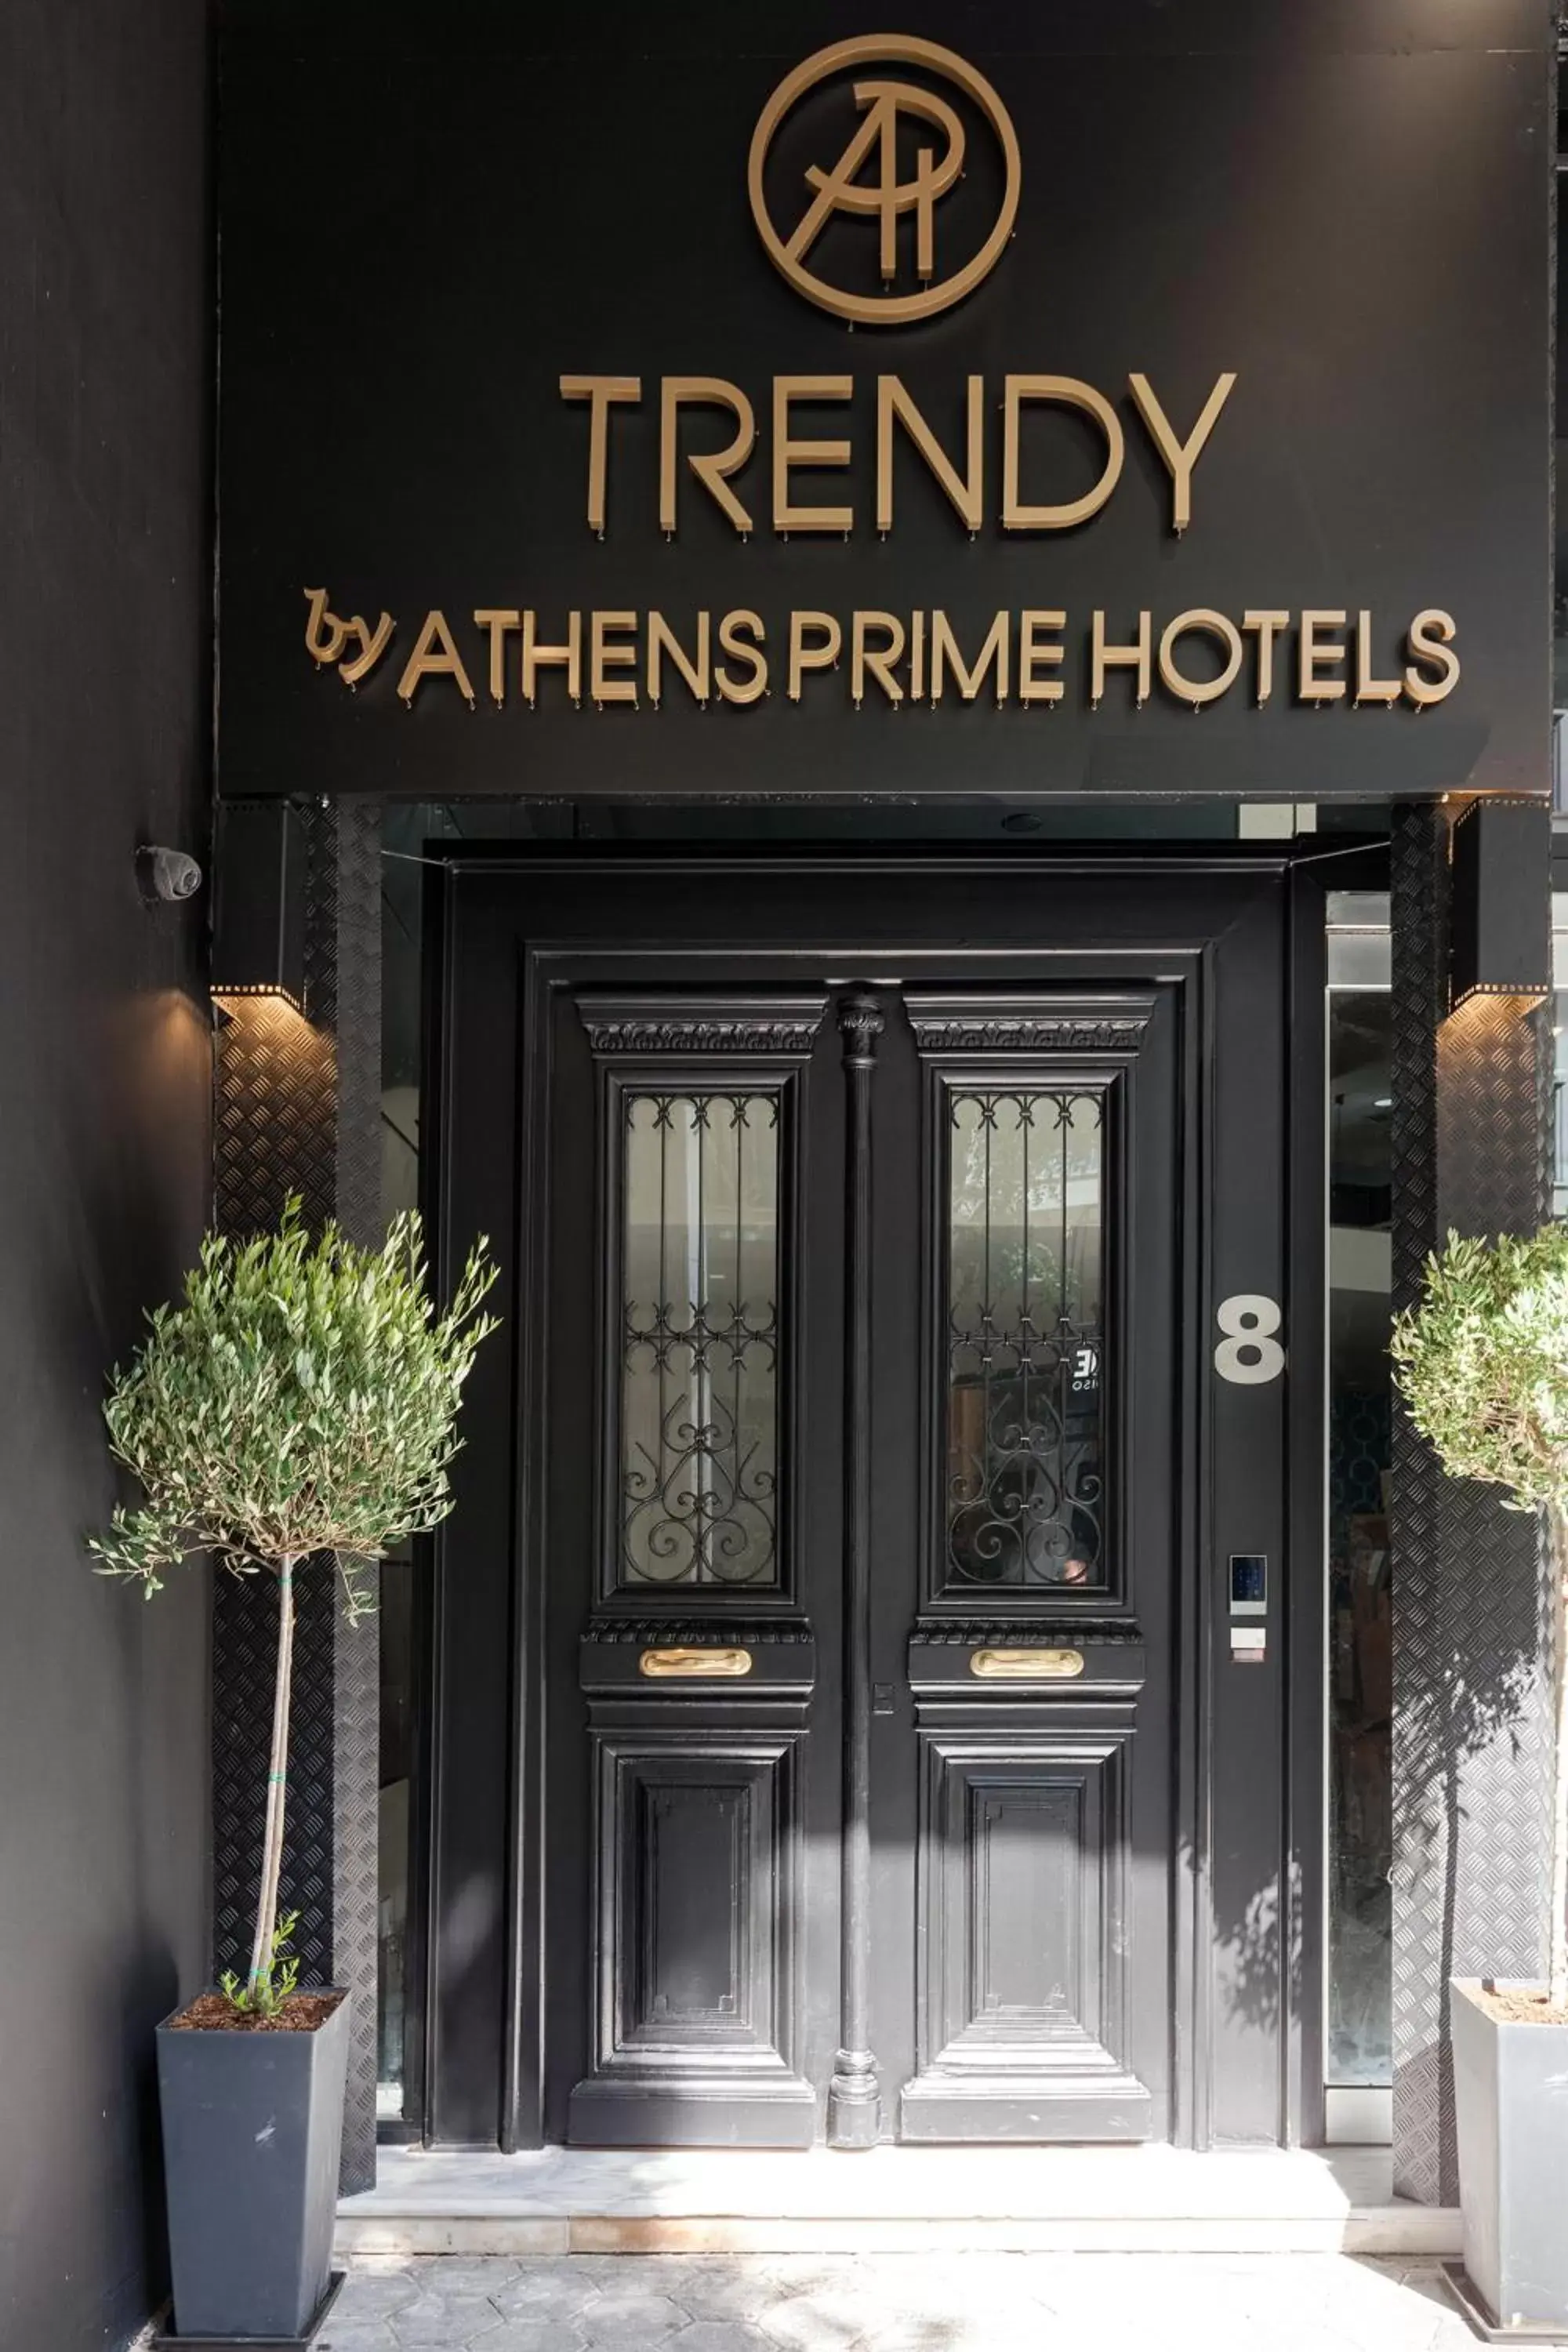 Facade/entrance in Trendy Hotel by Athens Prime Hotels